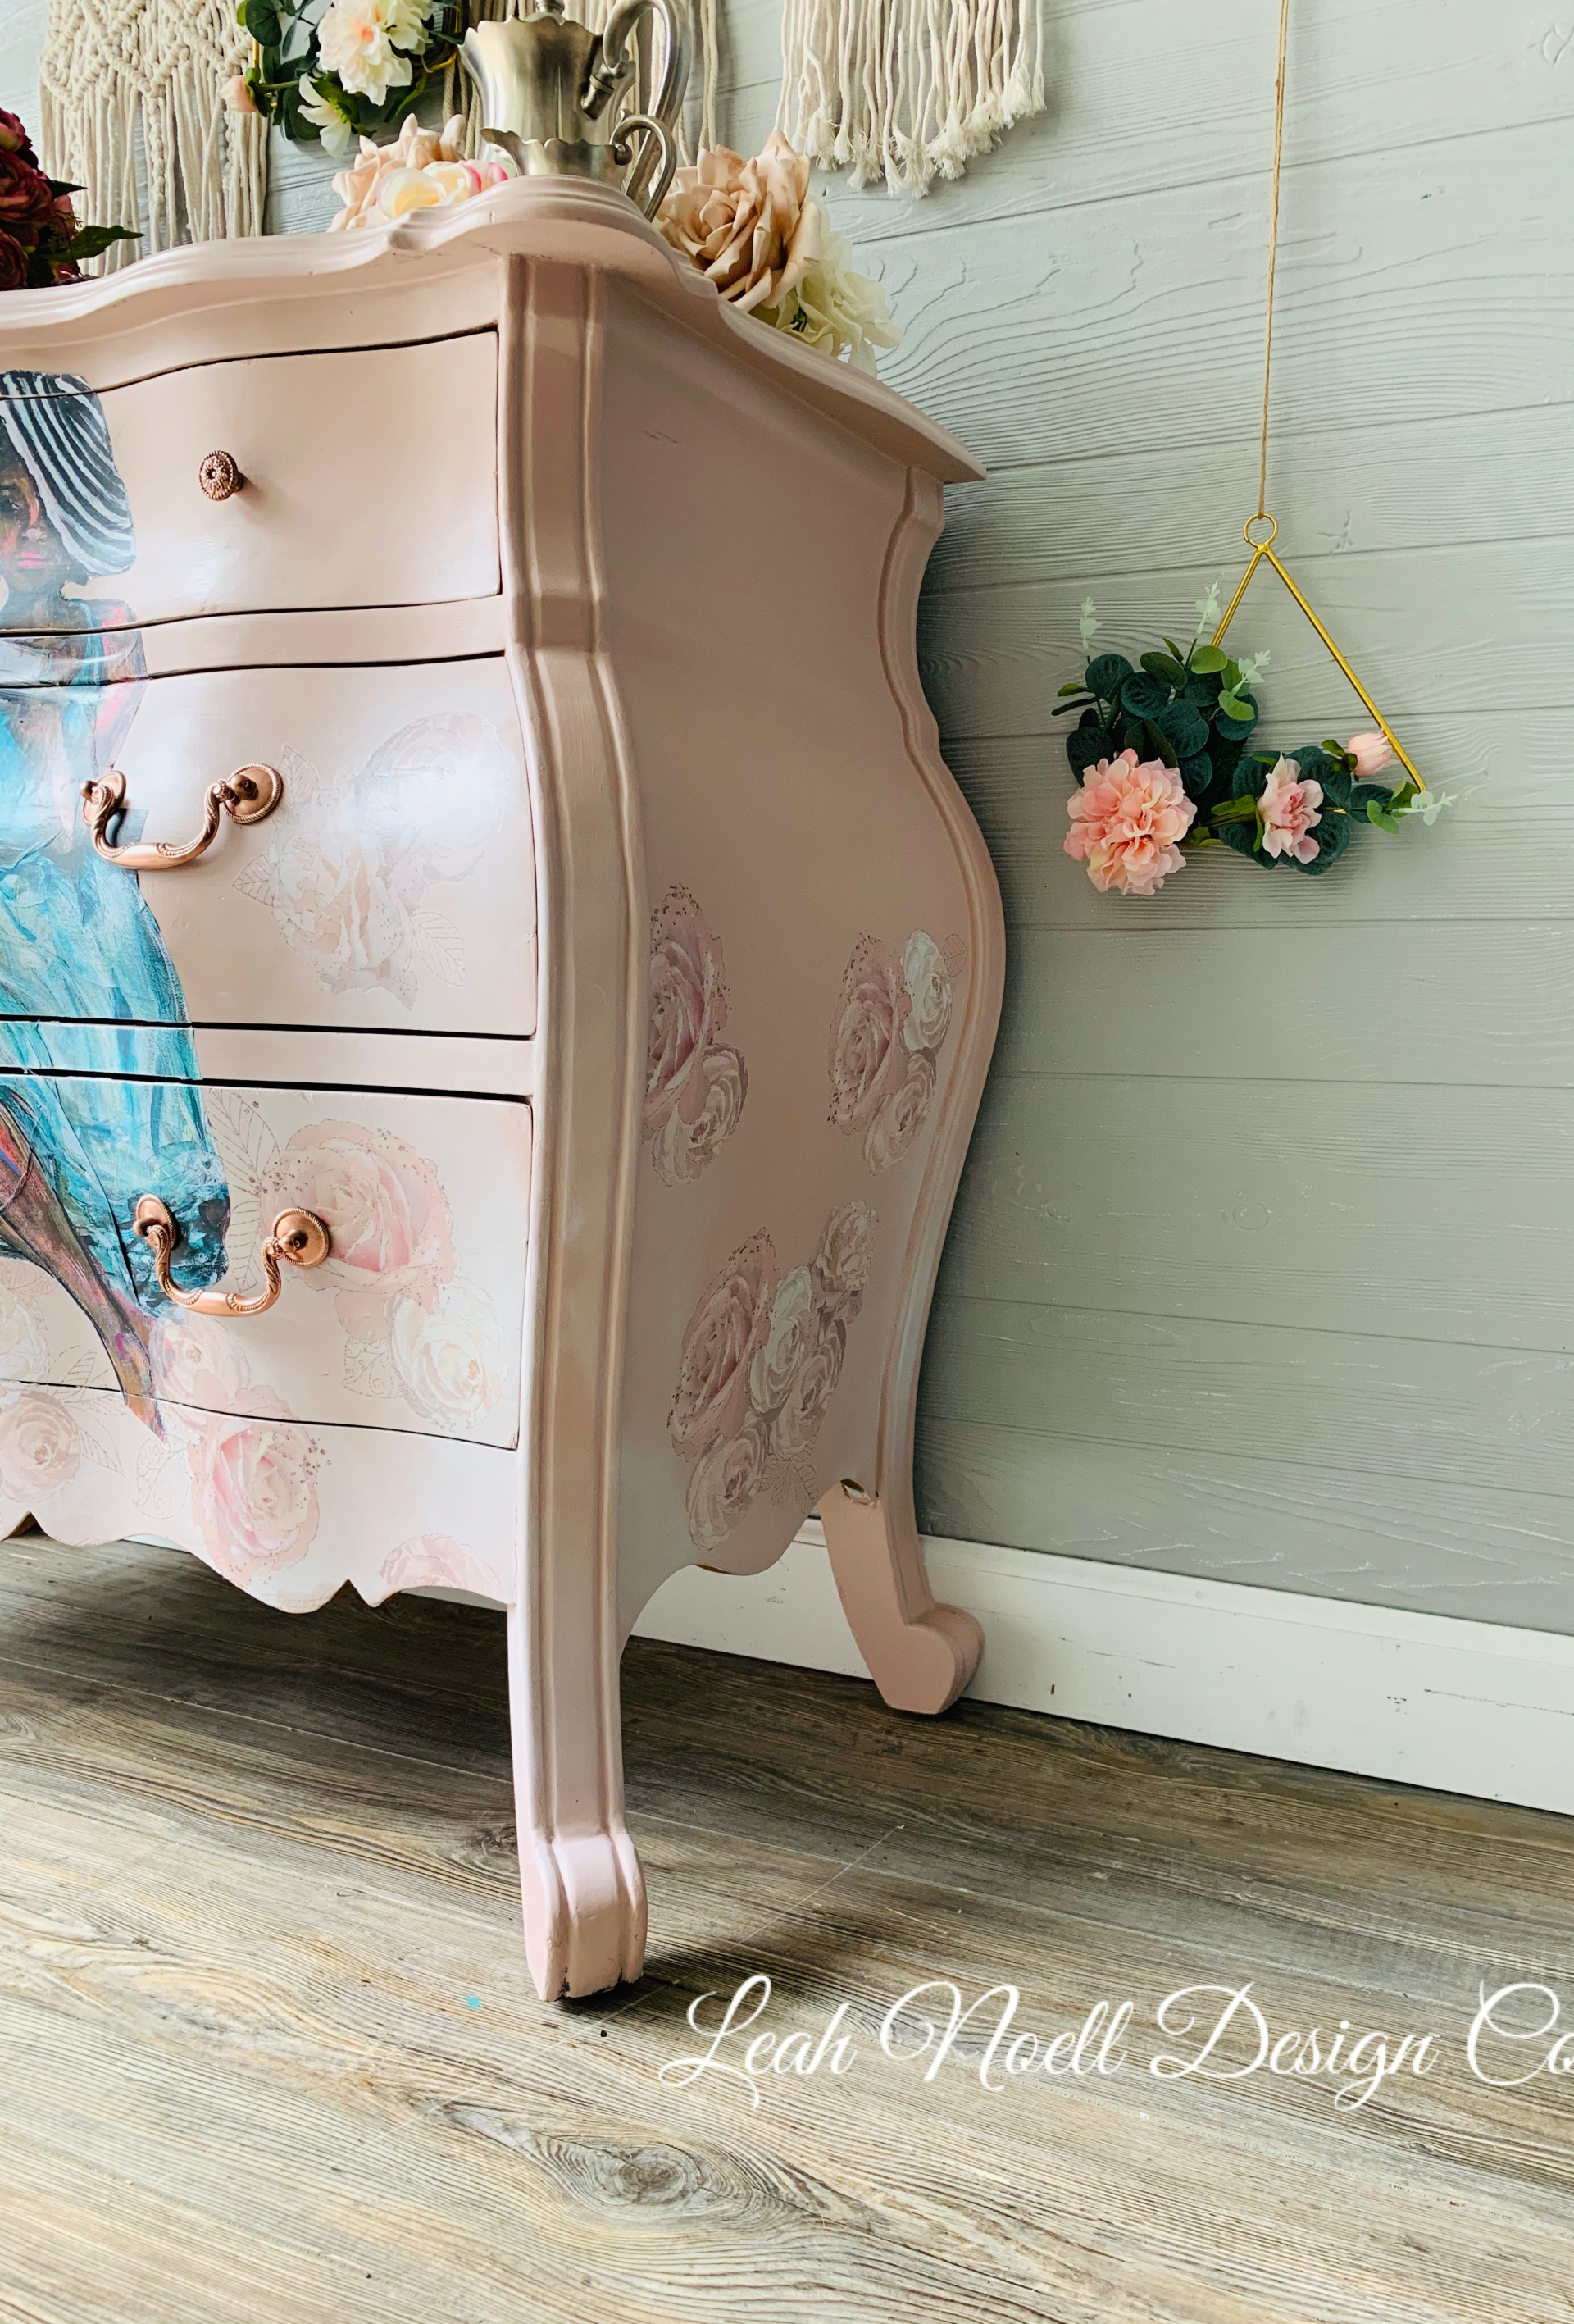 How to paint a bombay chest. How to decorate a bombay chest.